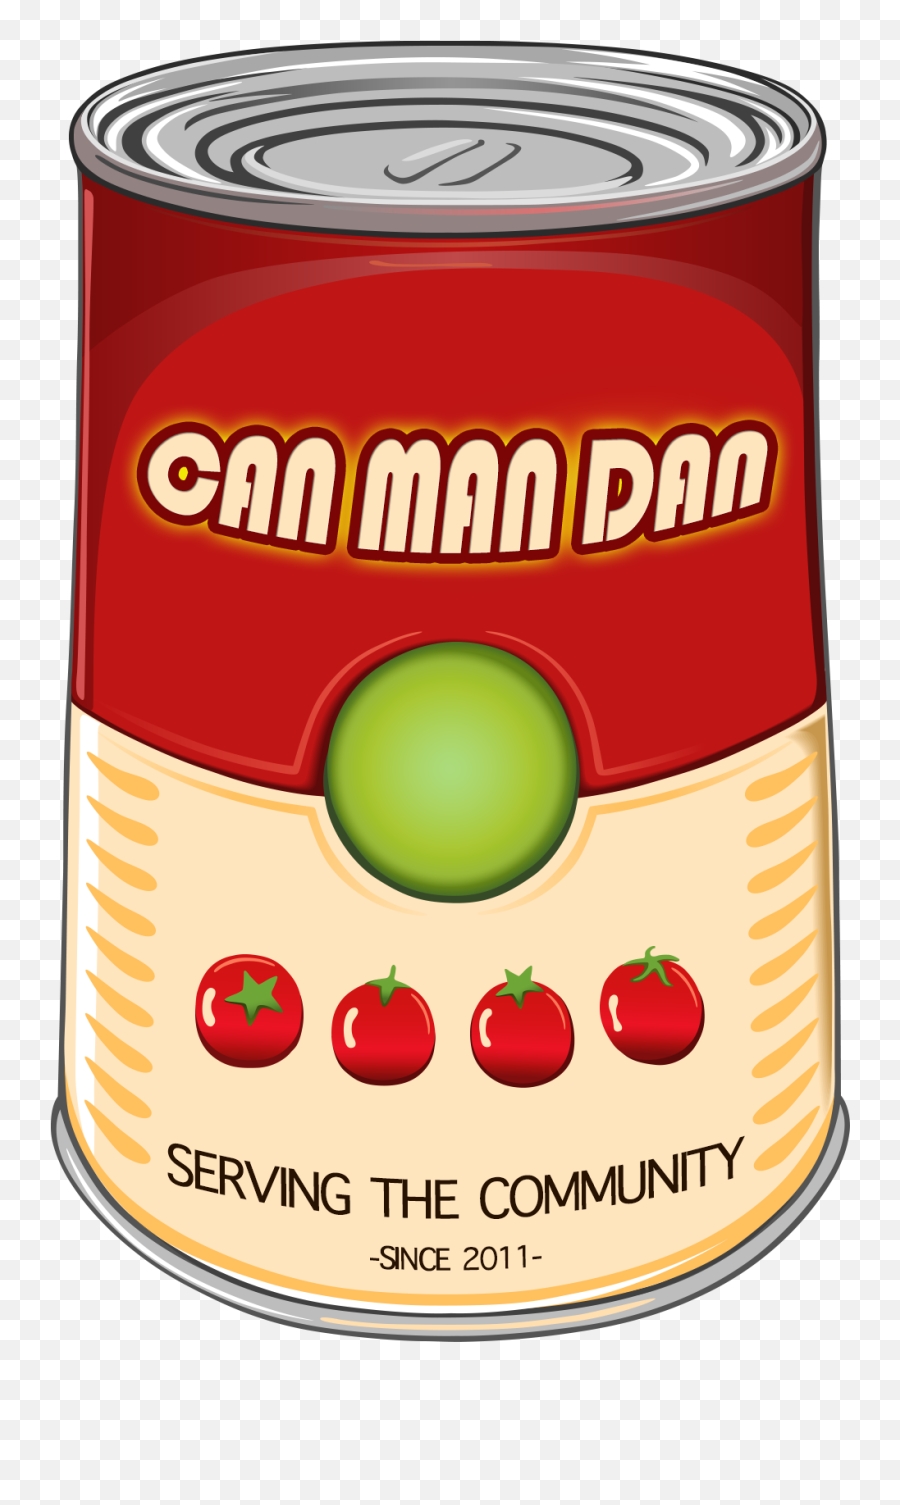 Canned Food - Food Can Transparent Background Can Clipart Transparent Emoji,Soup Clipart